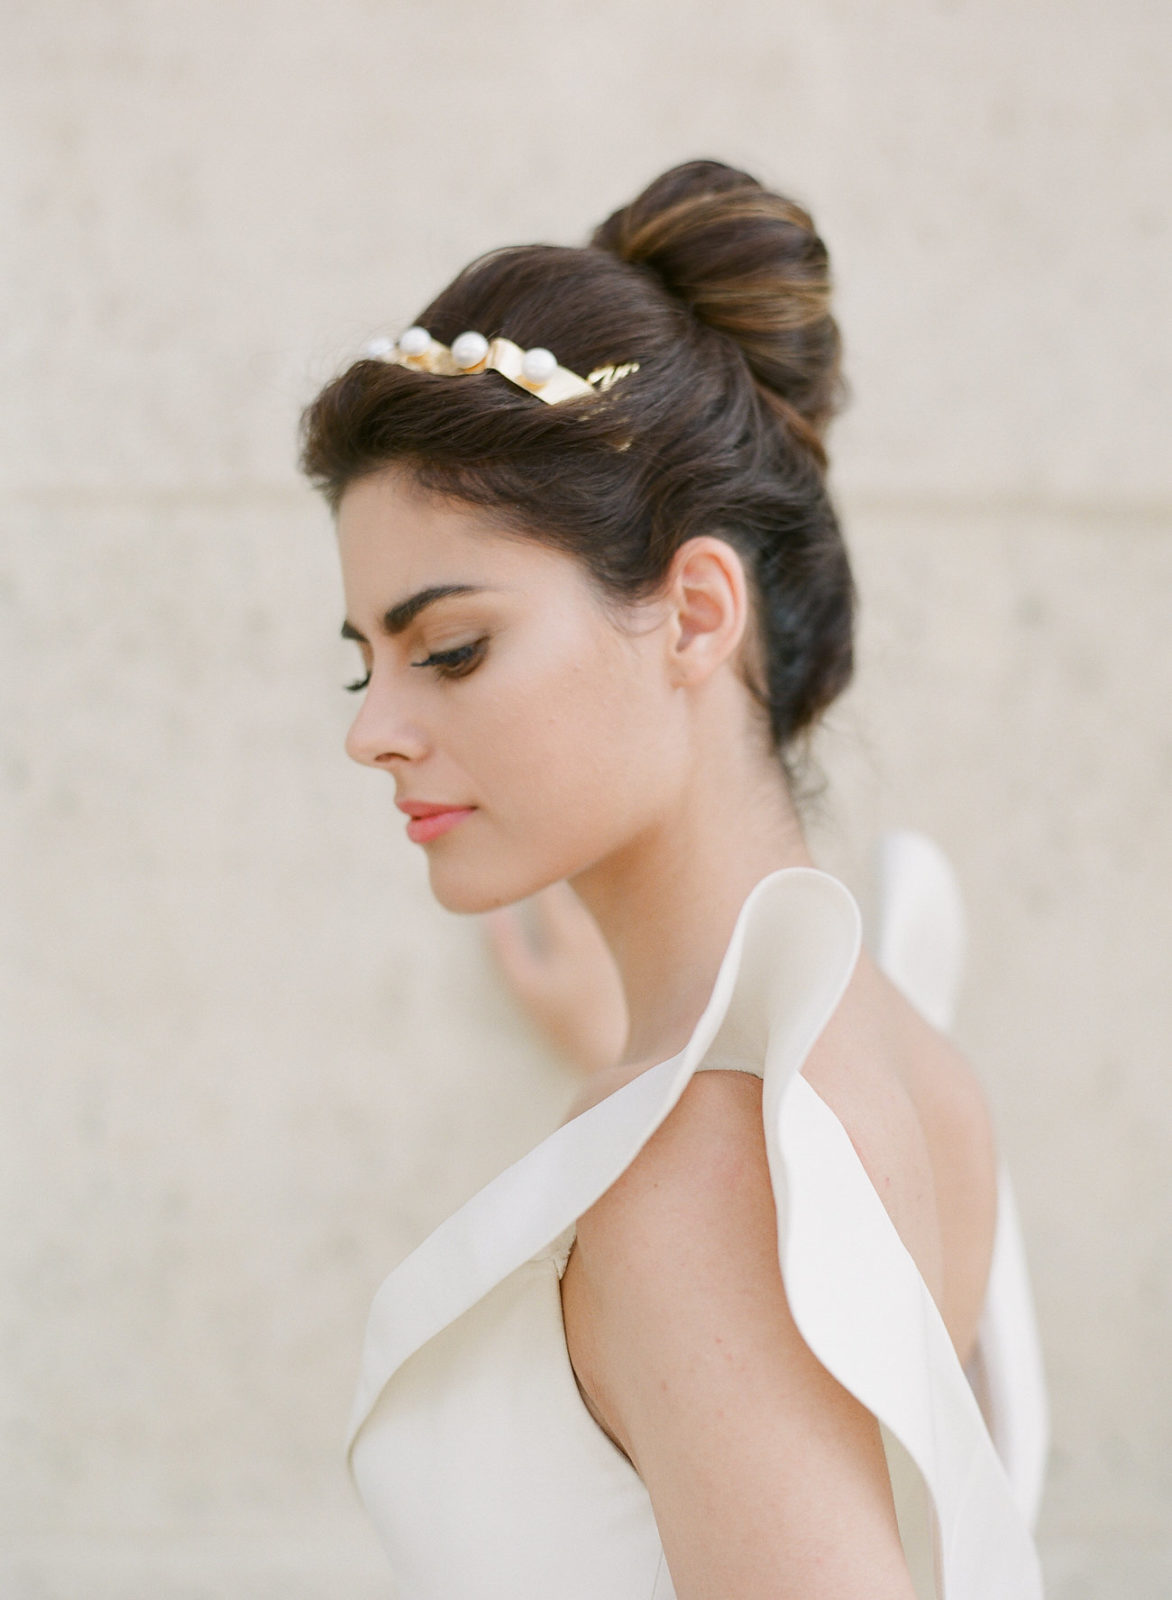 Romantic Bridal Hairstyles Photographed by Molly Carr Photography | Fine Art Bridal Hair and Makeup | Paris Wedding Photographer | Paris Film Photographer | France Destination Wedding | Musee Rodin Wedding with Brunette Bride